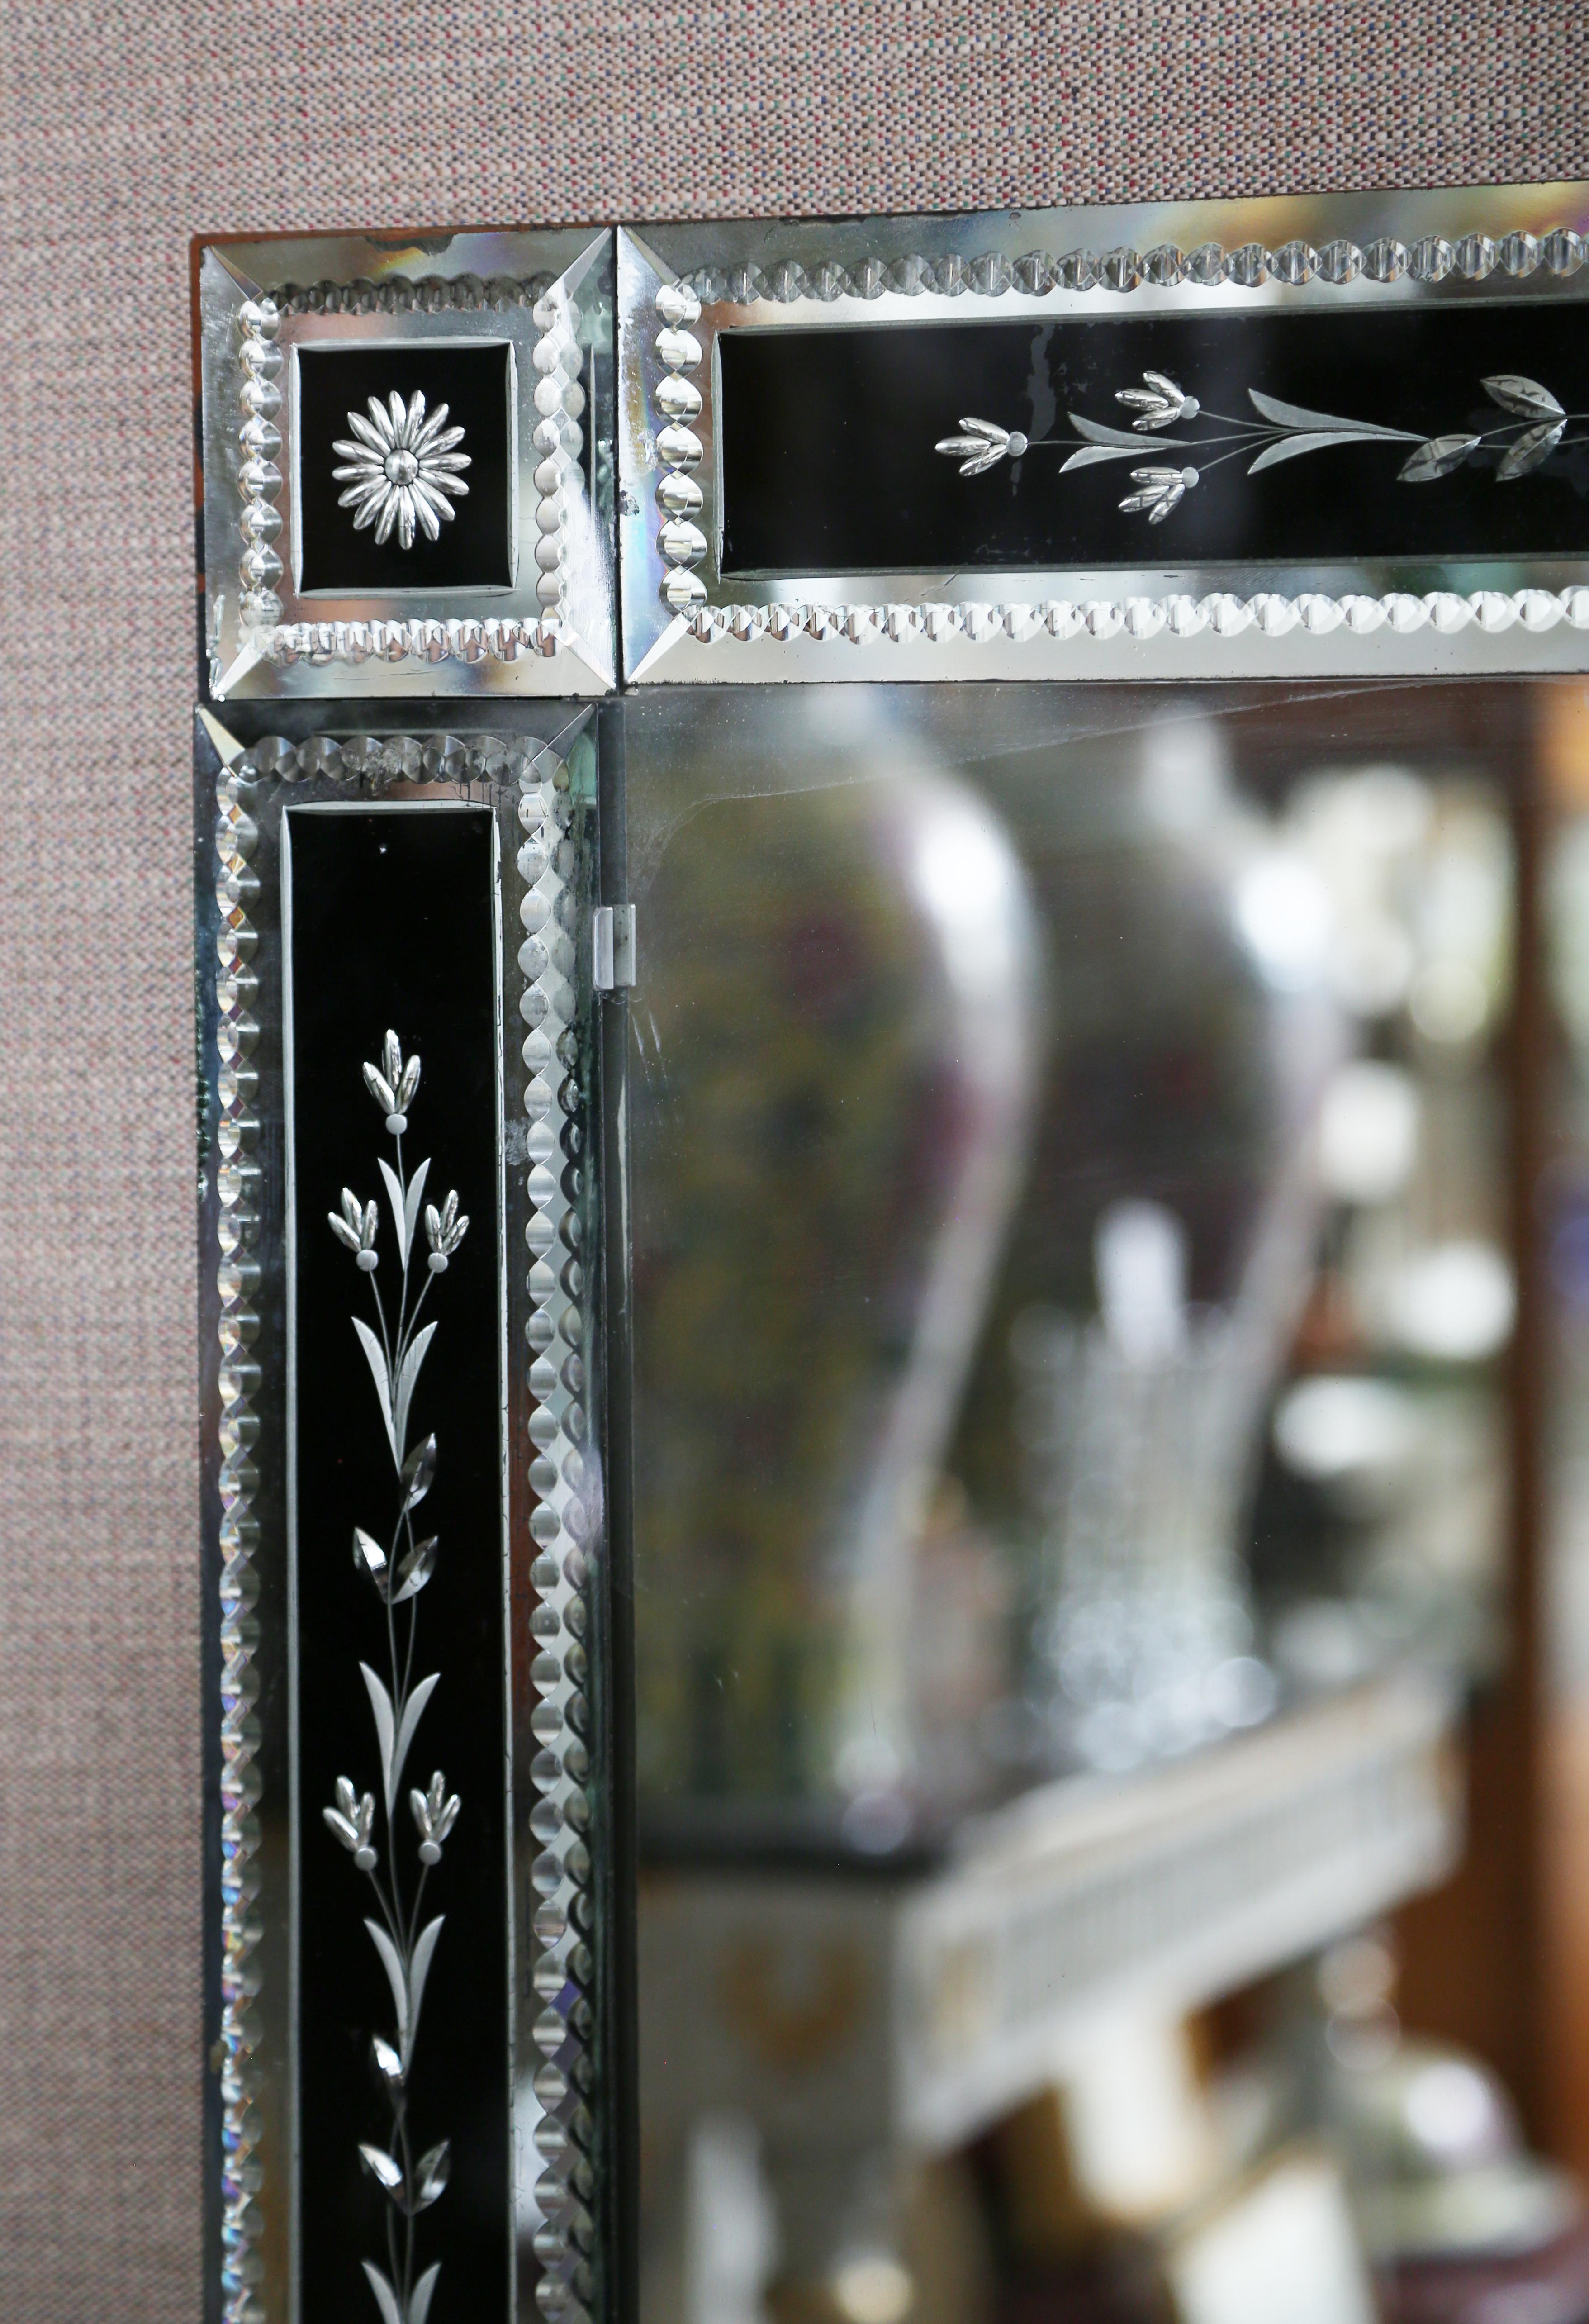 Early Art Deco Venetian glass rectangular mirror in black and clear. Each of the eight pieces making up the frame are cut, engraved, beveled and have zipper cut edges. There are several small edge flakes on the perimeter.